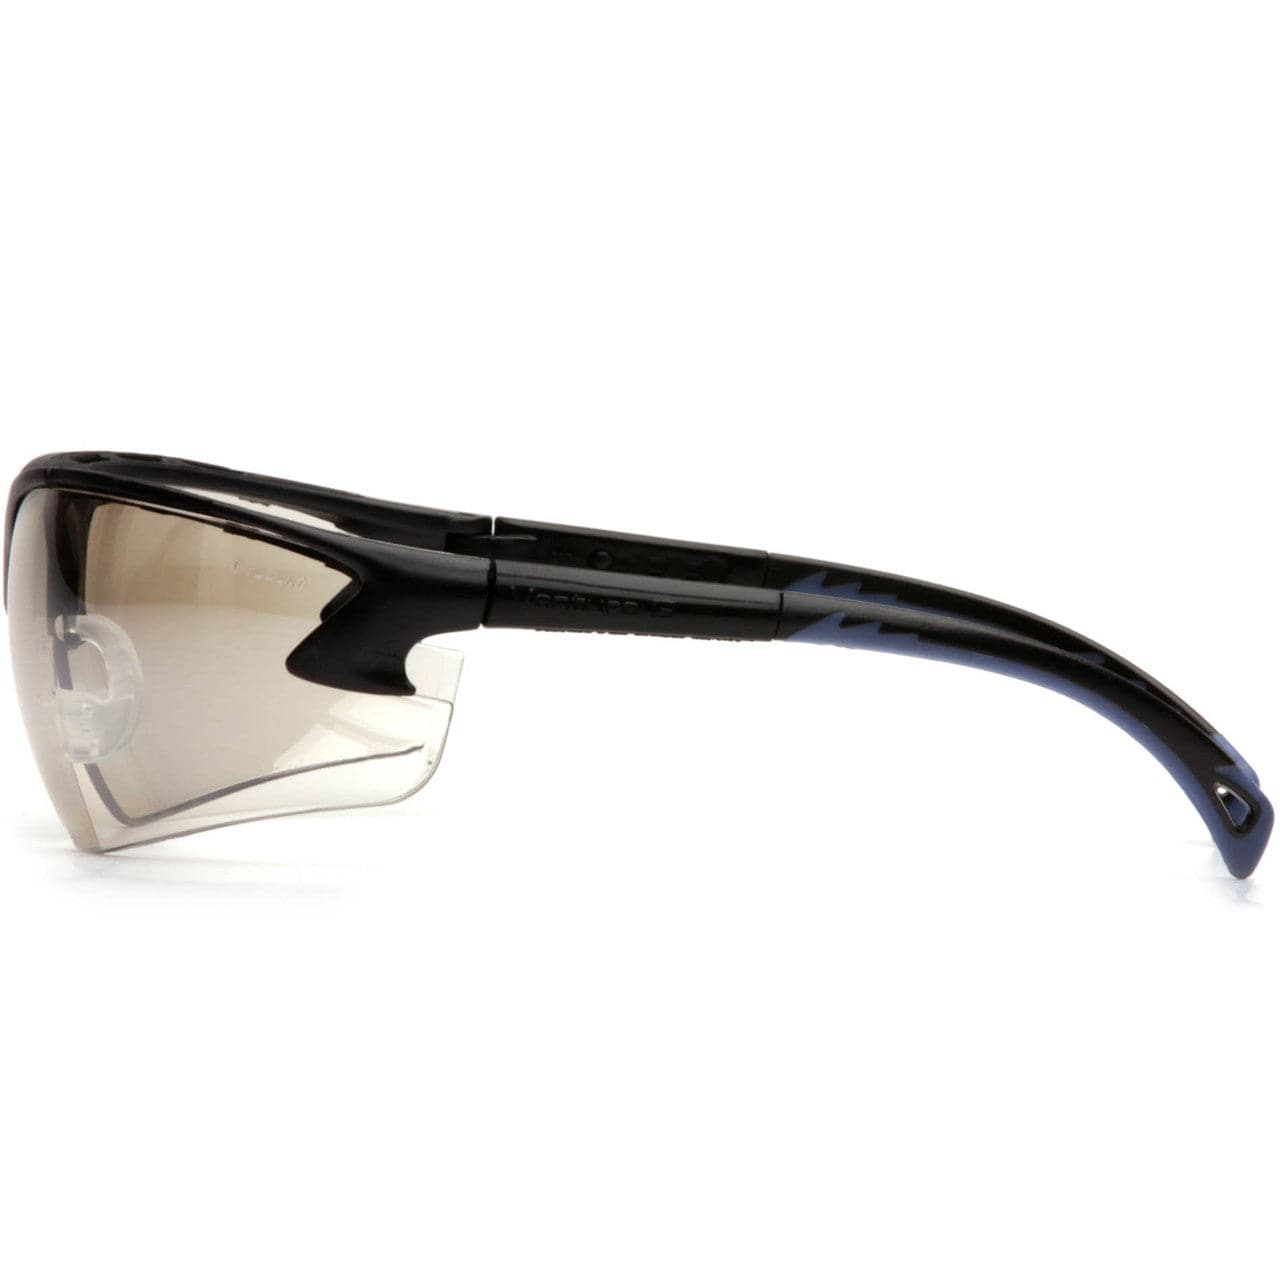 Pyramex Venture 3 Safety Glasses with Black Frame and Indoor/Outdoor Lens SB5780D Side View